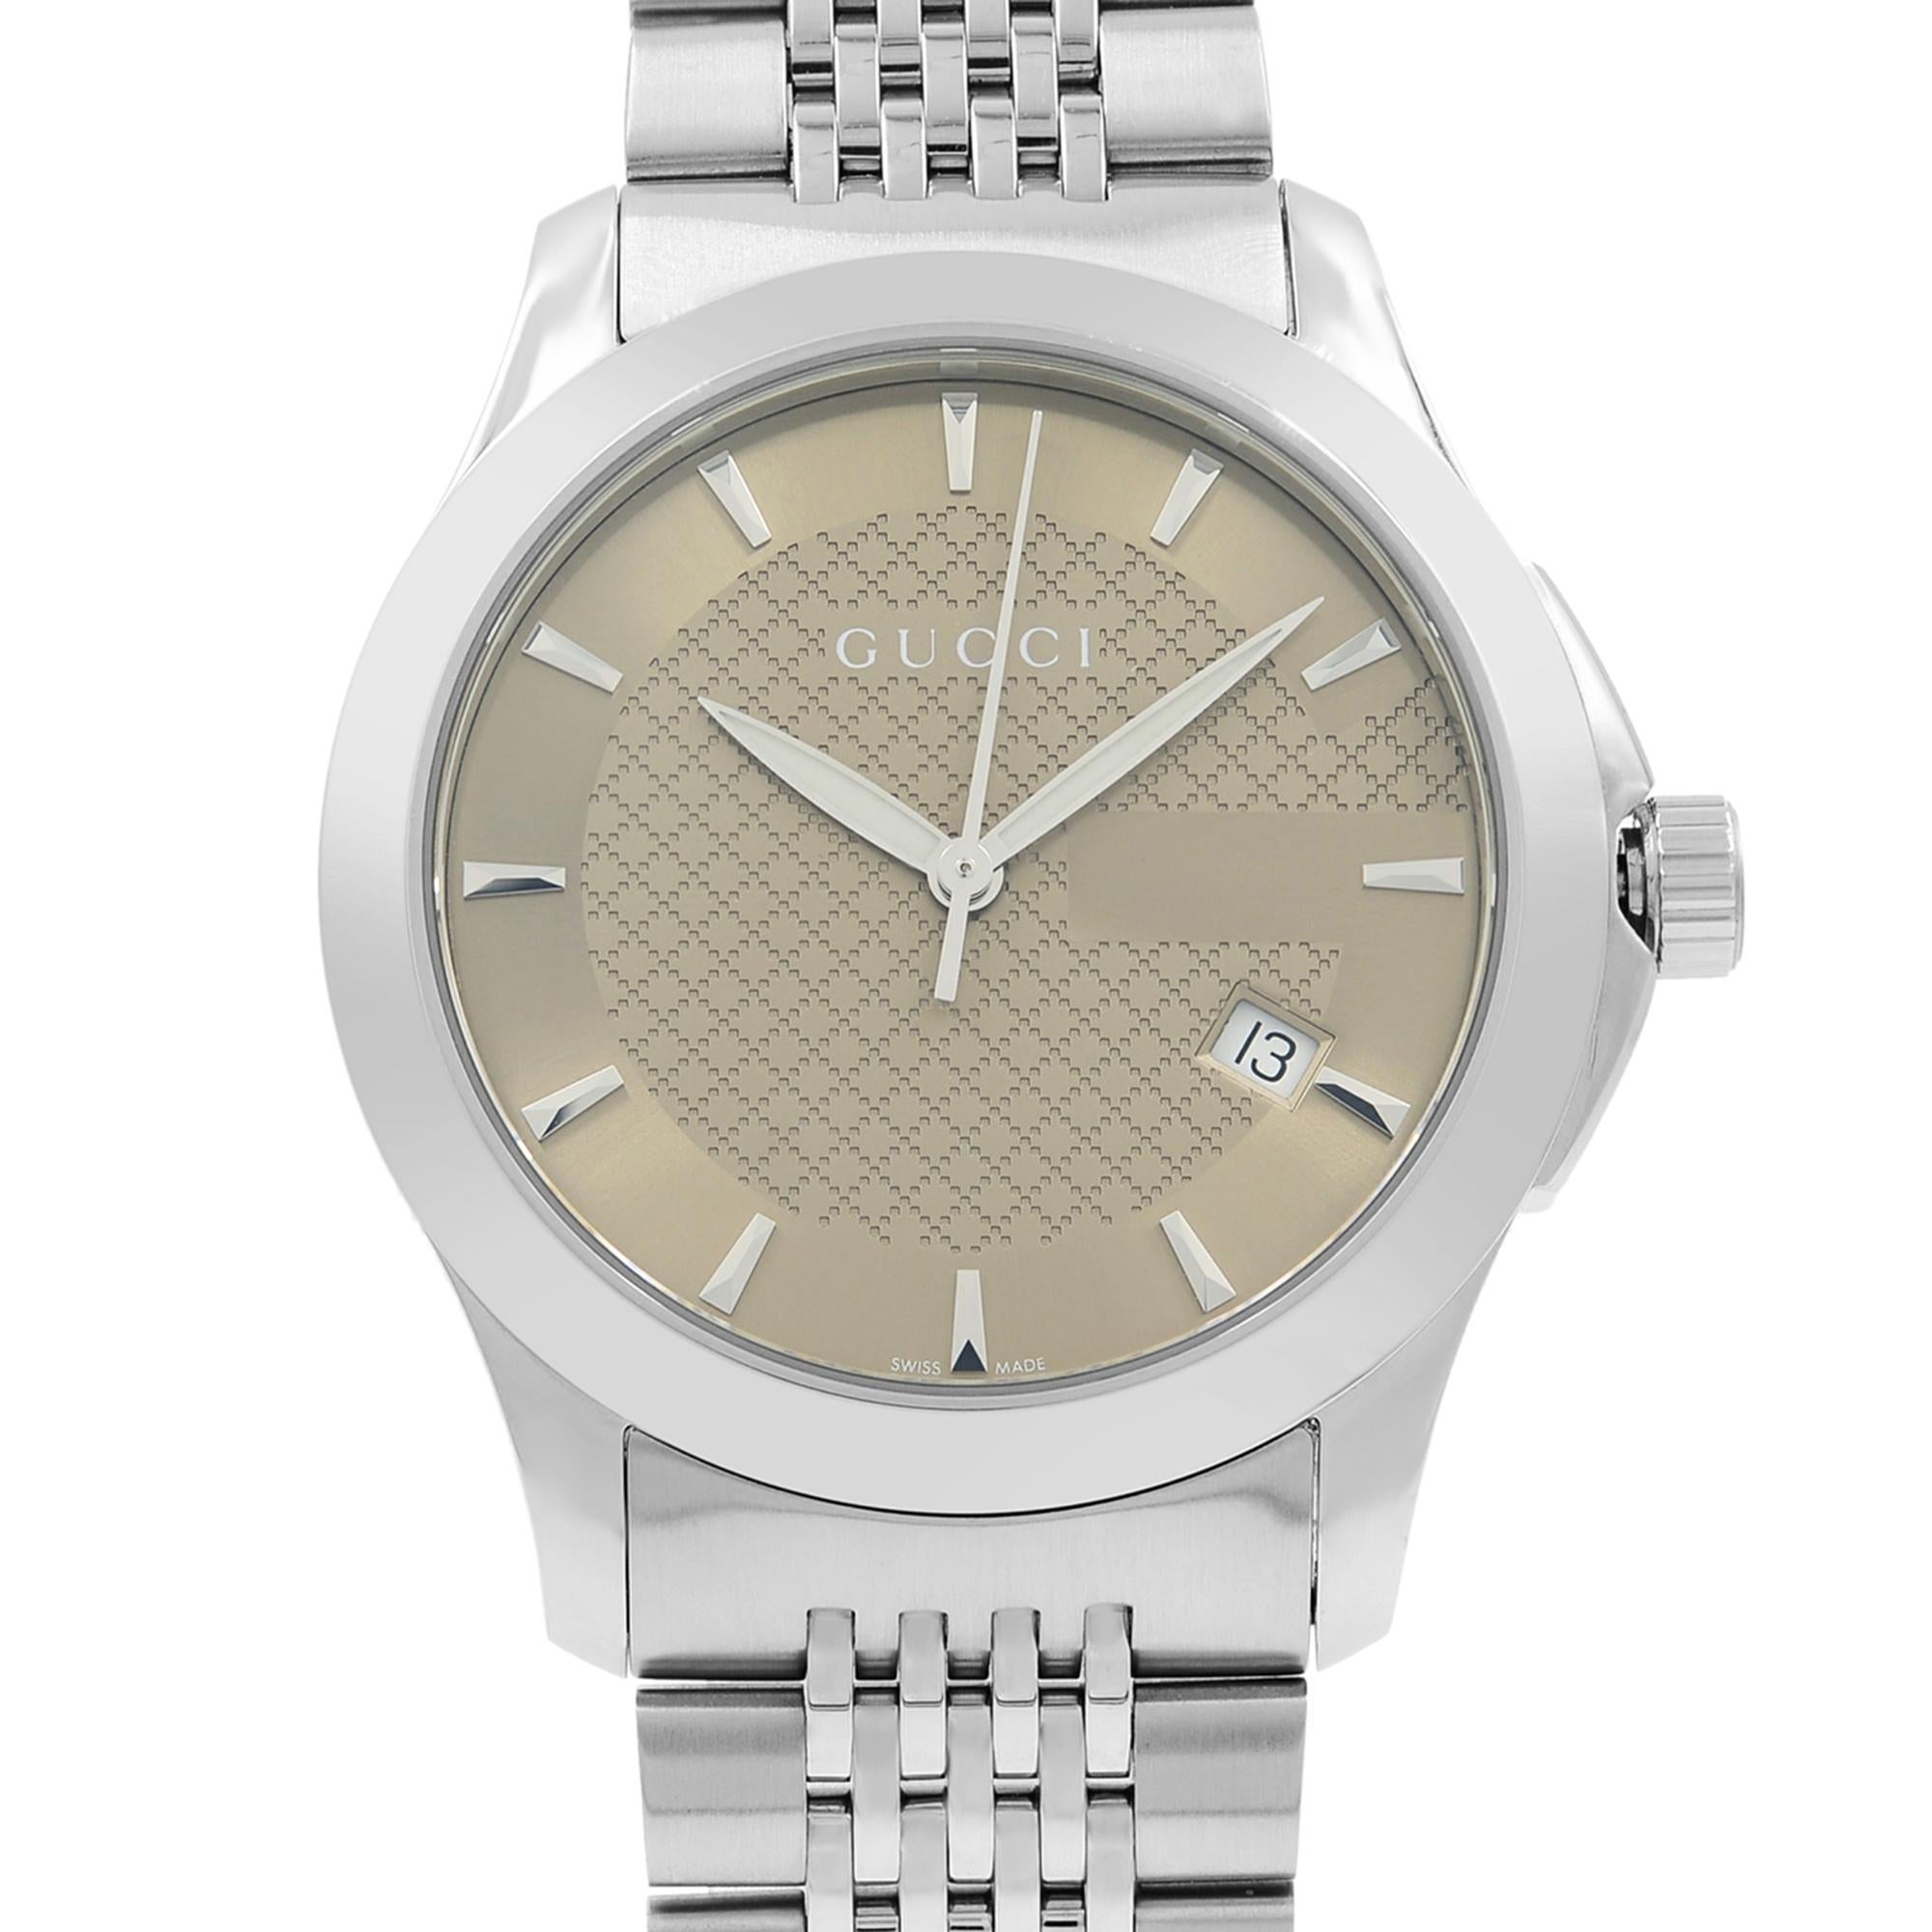 Pre-owned Gucci G-Timeless Date Steel Bronze Checkered Dial Quartz Men's Watch YA126406. Fits a 7 inches Wrist. This Beautiful Timepiece Features: Stainless Steel Case and Bracelet, Fixed Stainless Steel Bezel, Brown Gucci 'G' Dial with Luminous